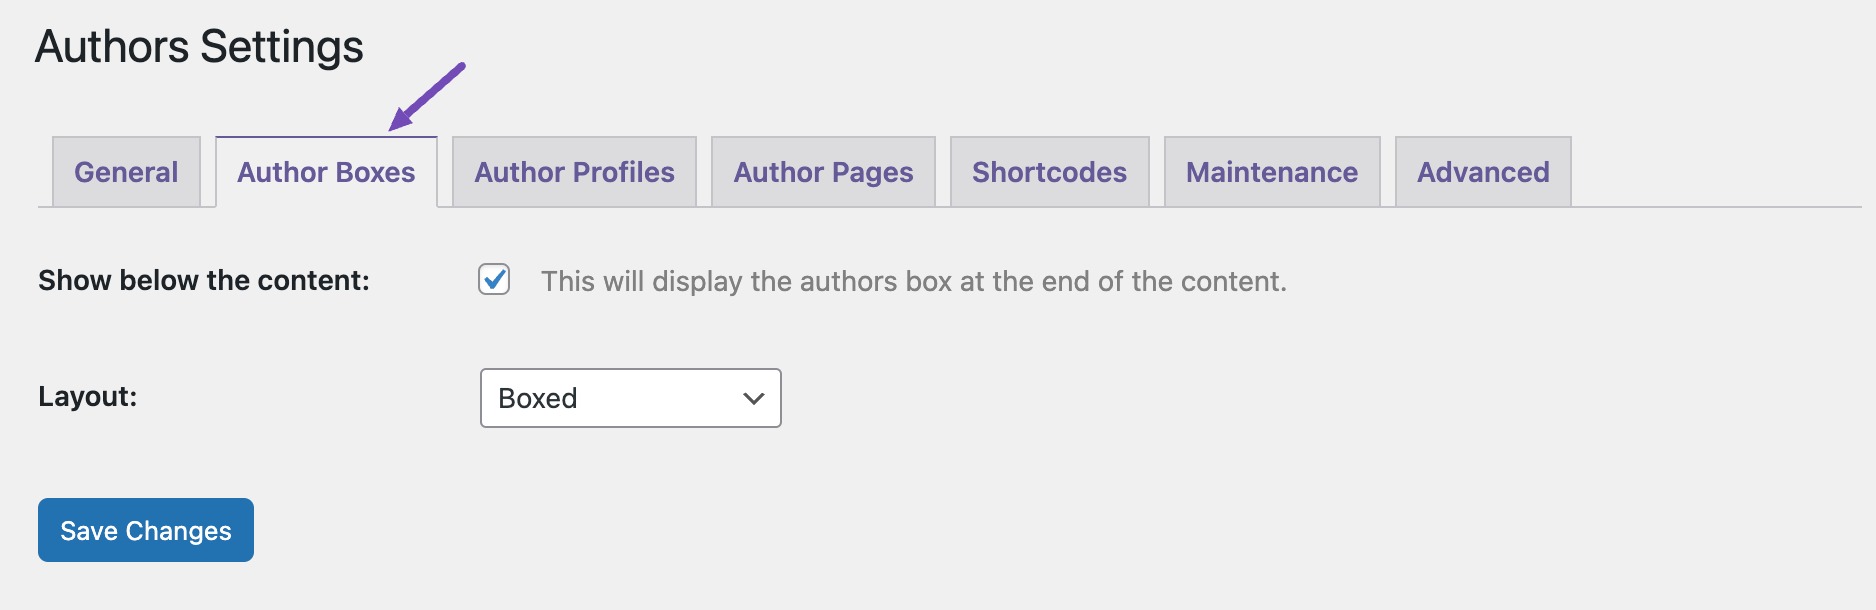 Author Boxes tab settings